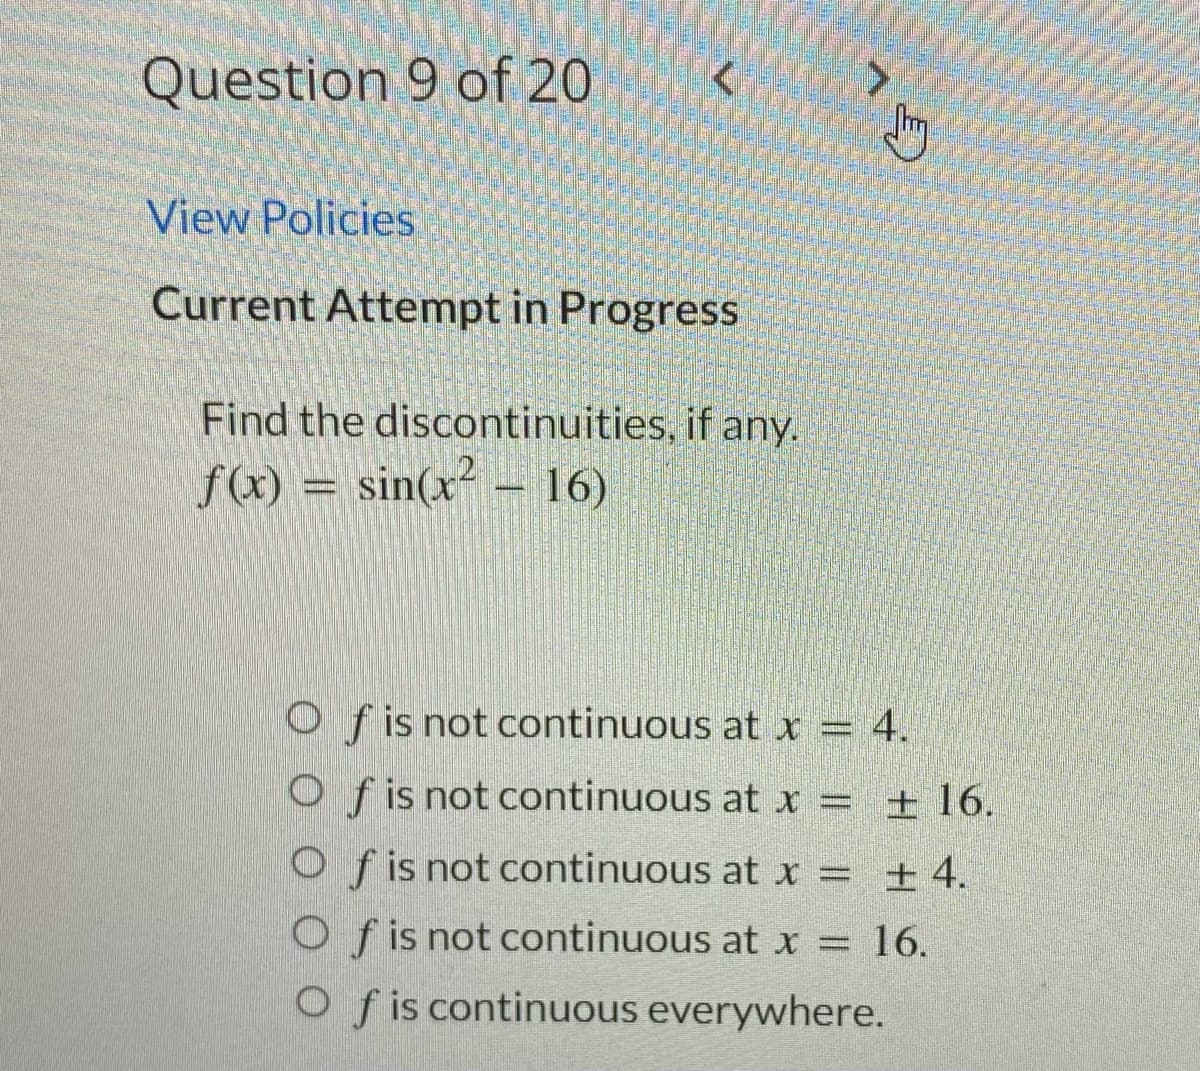 Question 9 of 20
<
View Policies
Current Attempt in Progress
Find the discontinuities, if any.
f(x) = sin(x² 16)
B
Of is not continuous at x = 4.
Of is not continuous at x = ± 16.
Of is not continuous at x =
± 4.
Of is not continuous at x =
Of is continuous everywhere.
16.